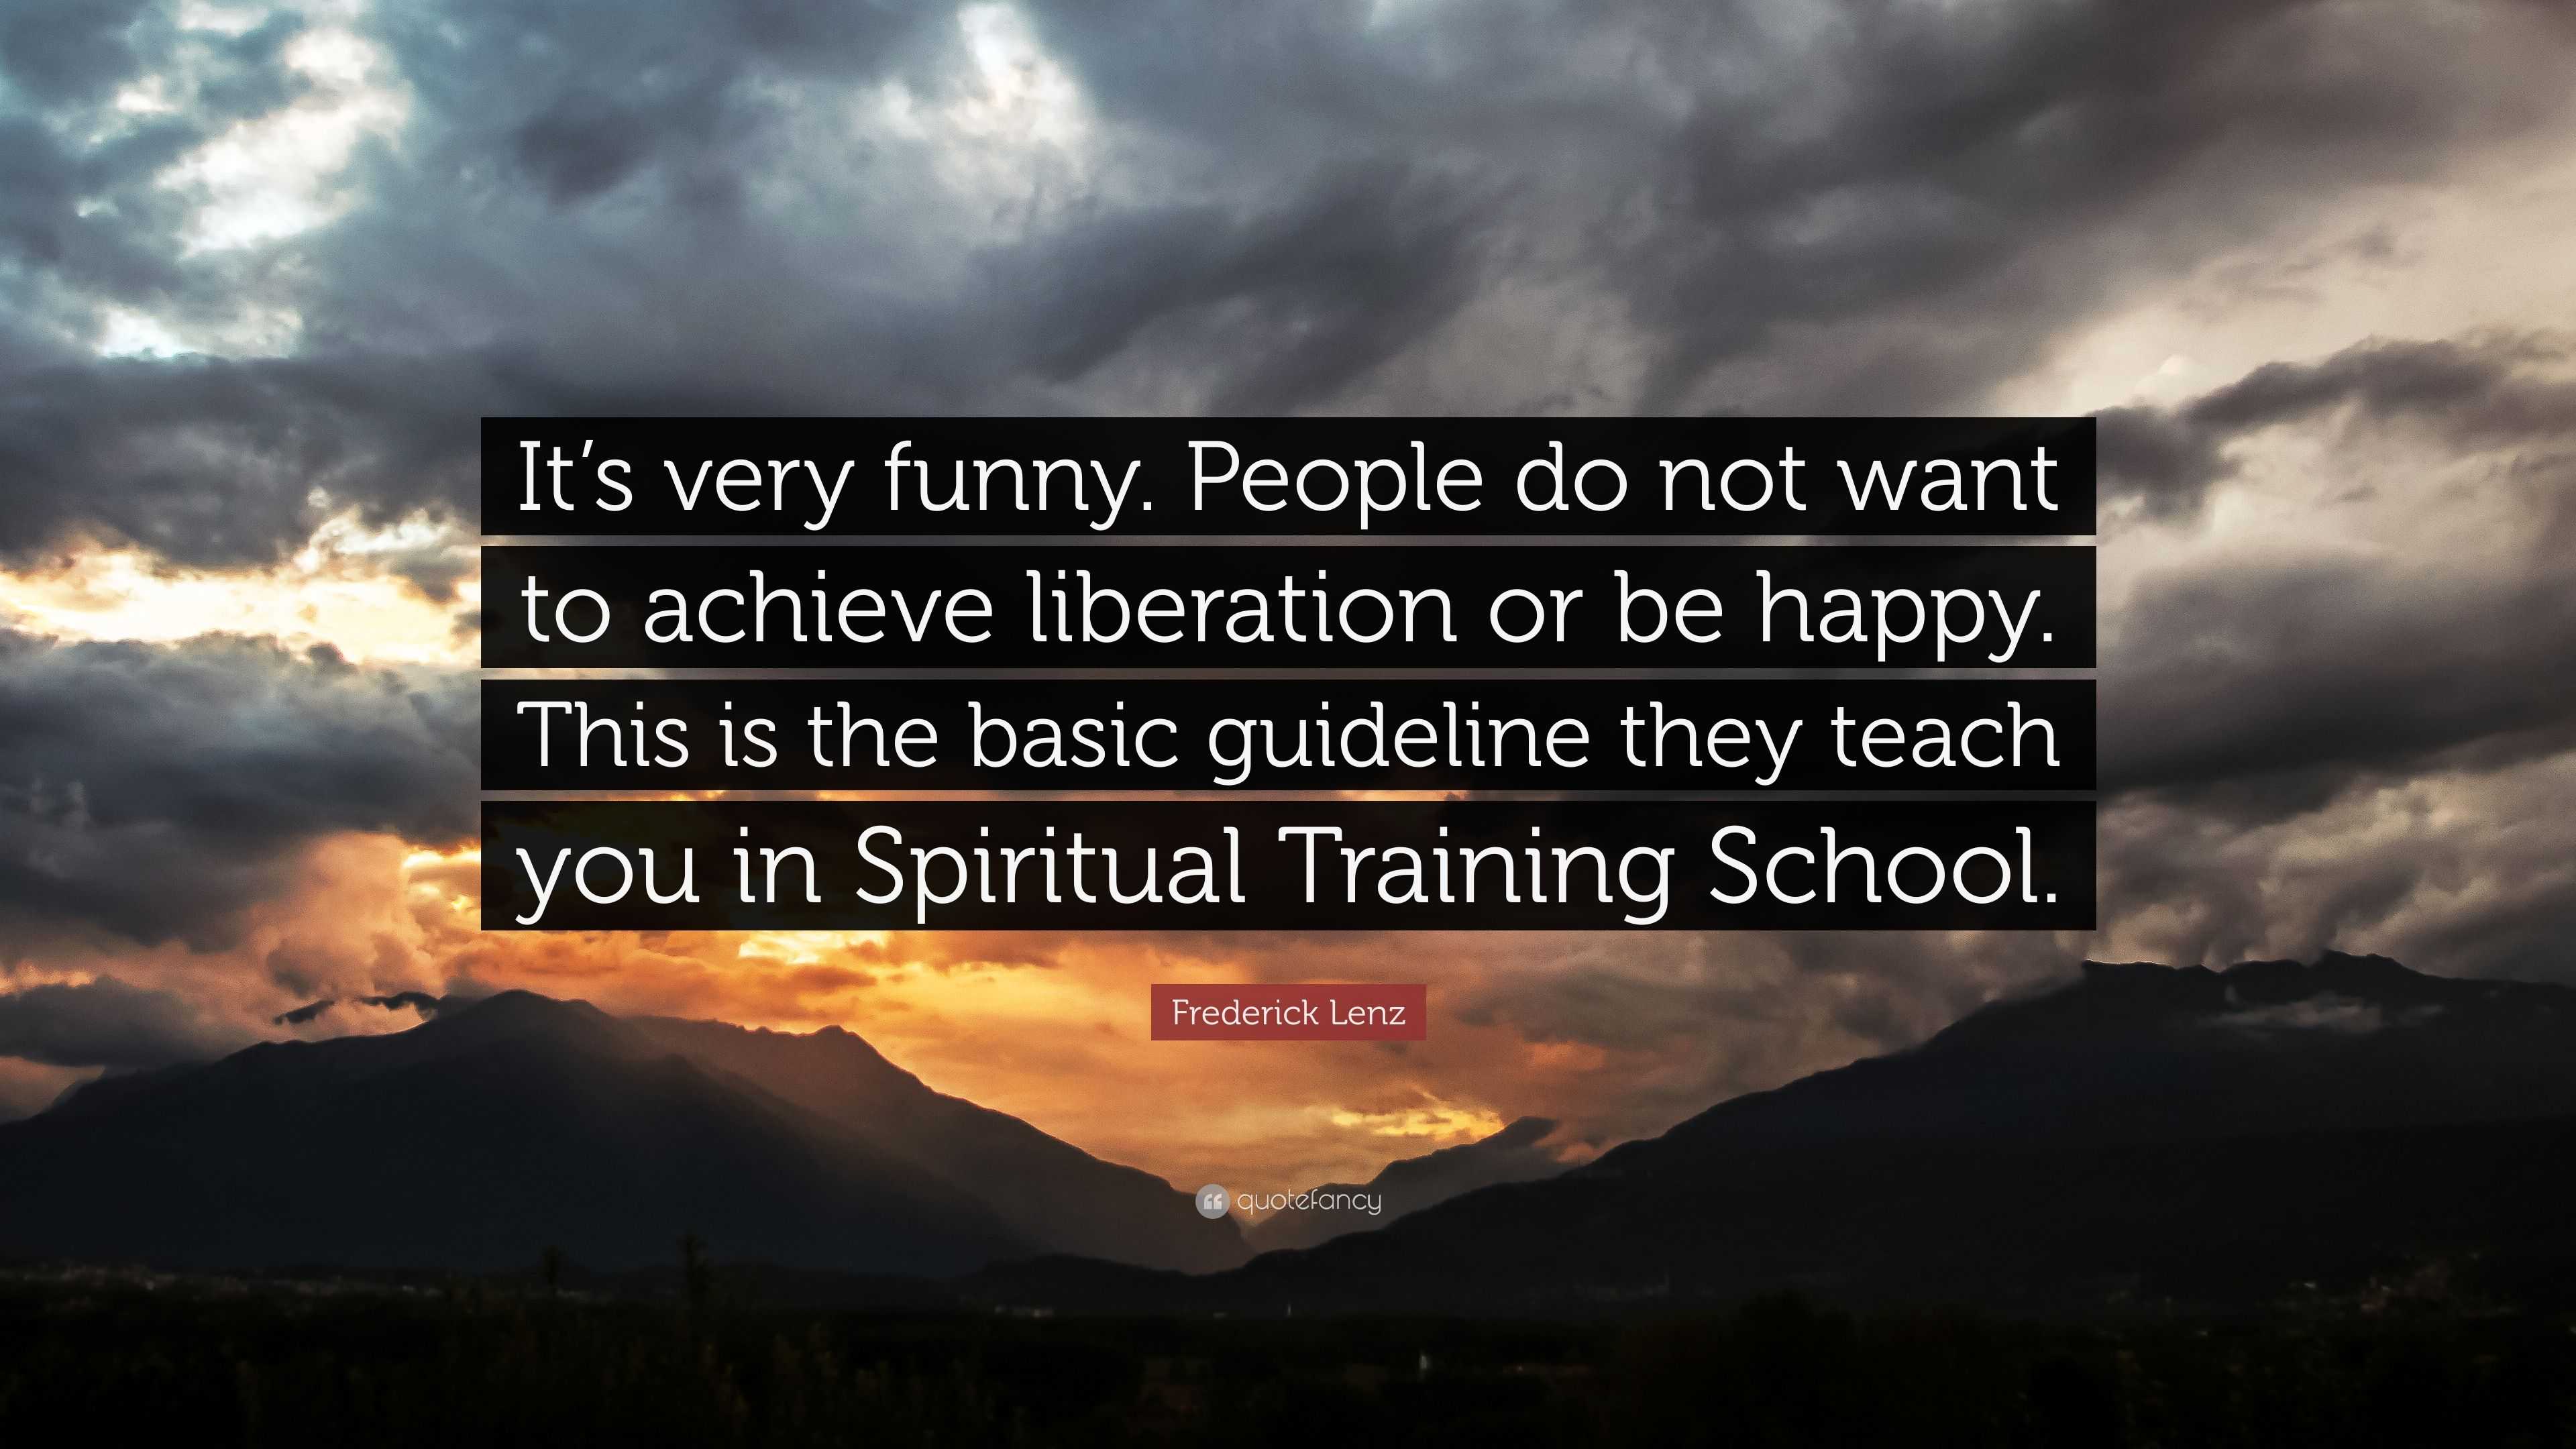 Frederick Lenz Quote: “It's very funny. People do not want to achieve  liberation or be happy. This is the basic guideline they teach you in  Spi...”